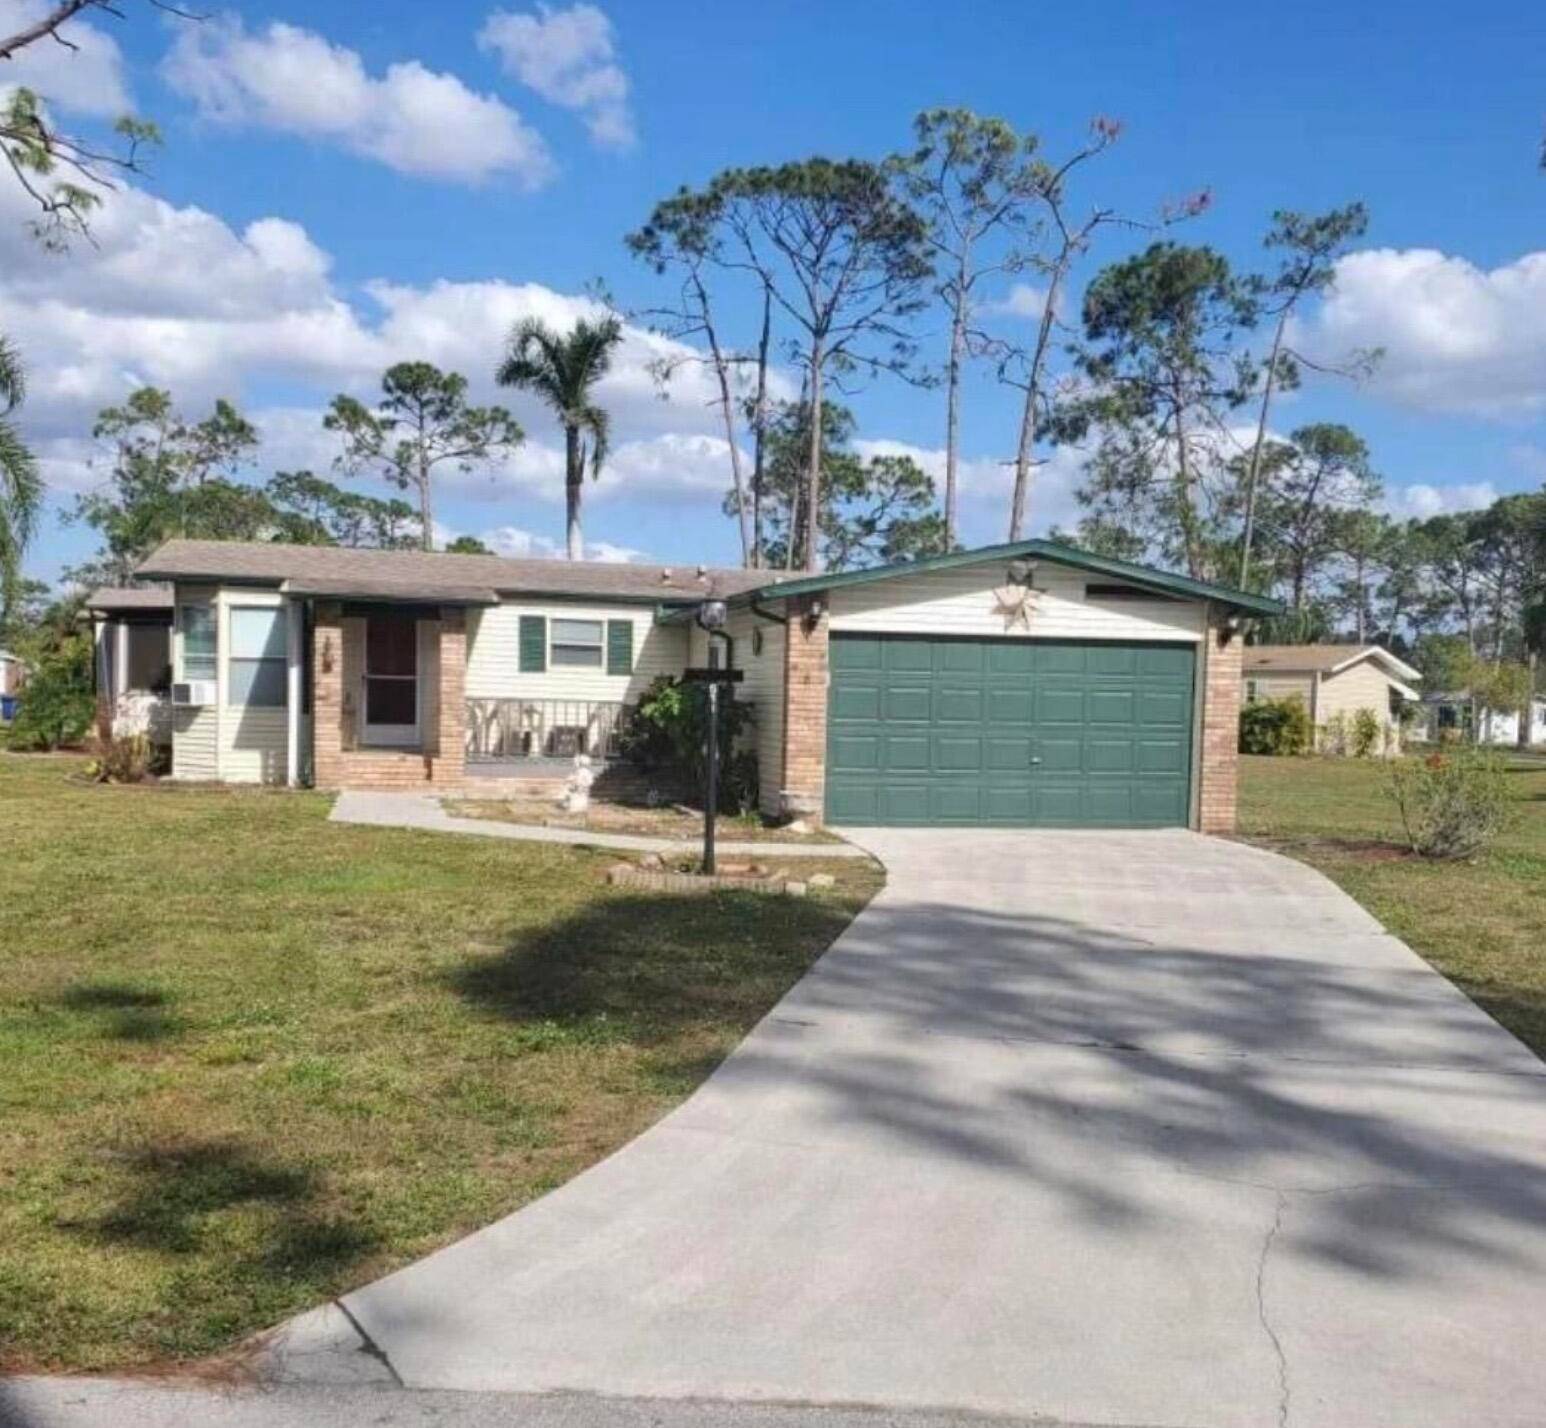 Check out this Fully Furnished 2BR 2BA with Garage Located in beautiful Pine Lakes Country Club in North Fort Myers Florida.